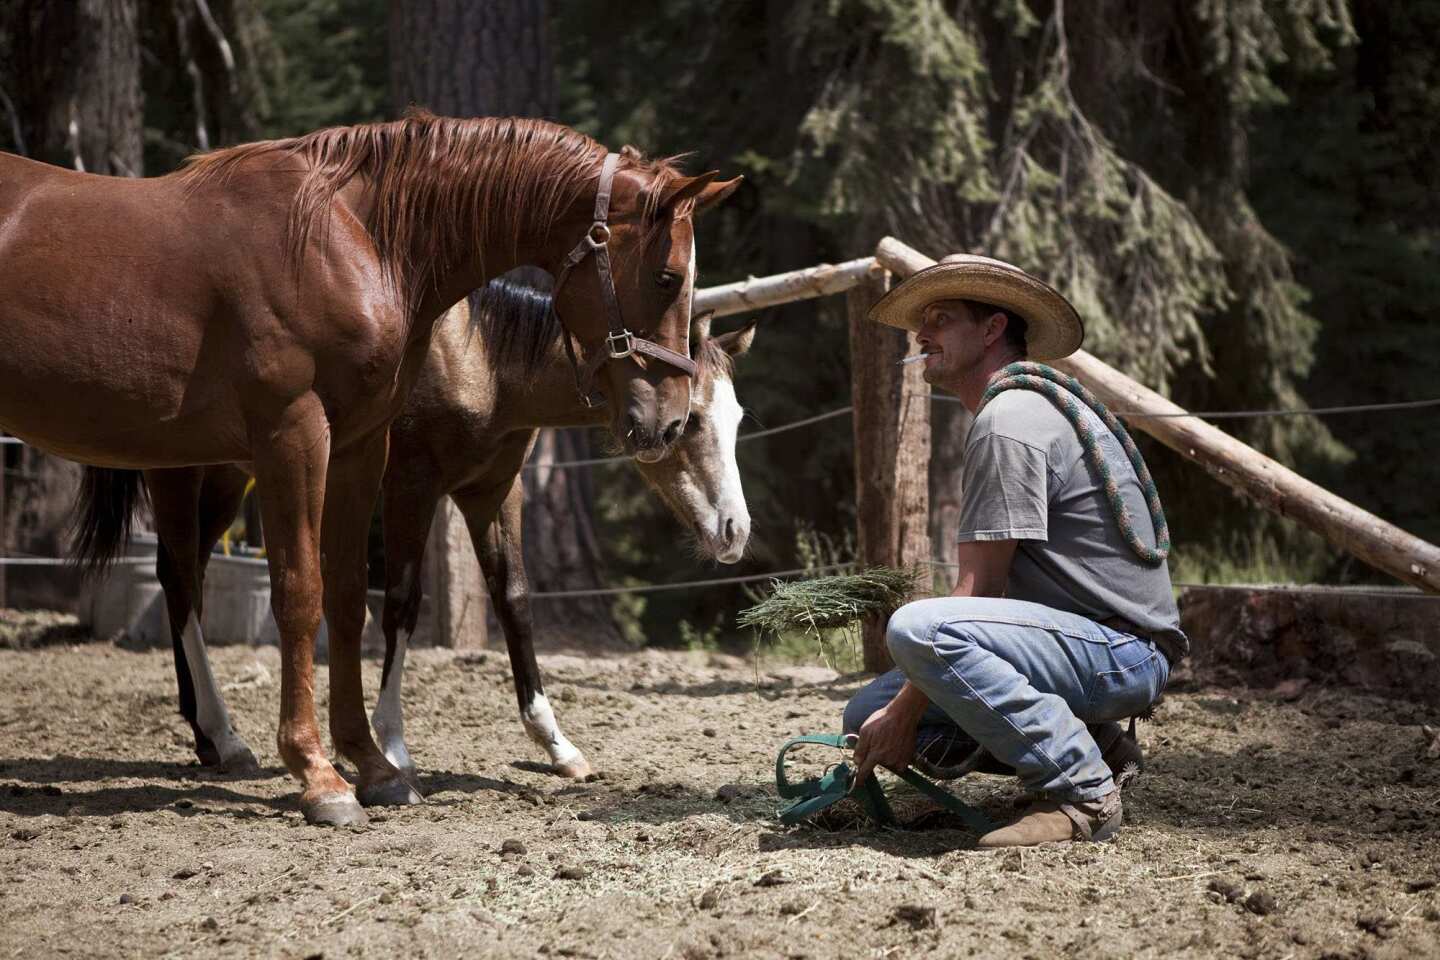 Rescued horses find a new home and purpose